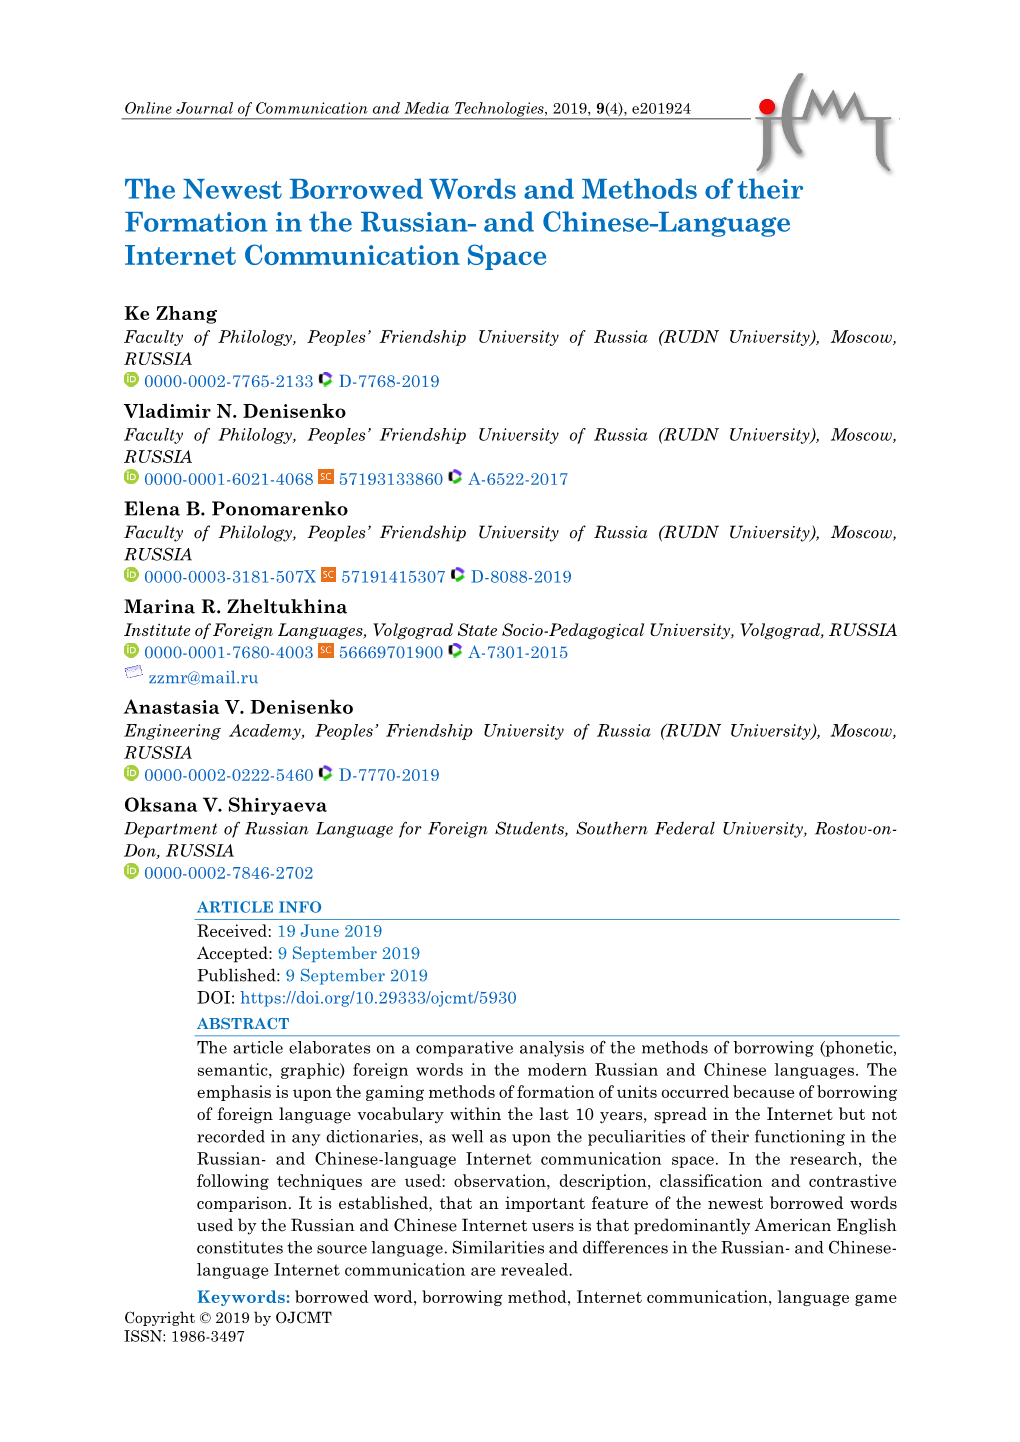 The Newest Borrowed Words and Methods of Their Formation in the Russian- and Chinese-Language Internet Communication Space